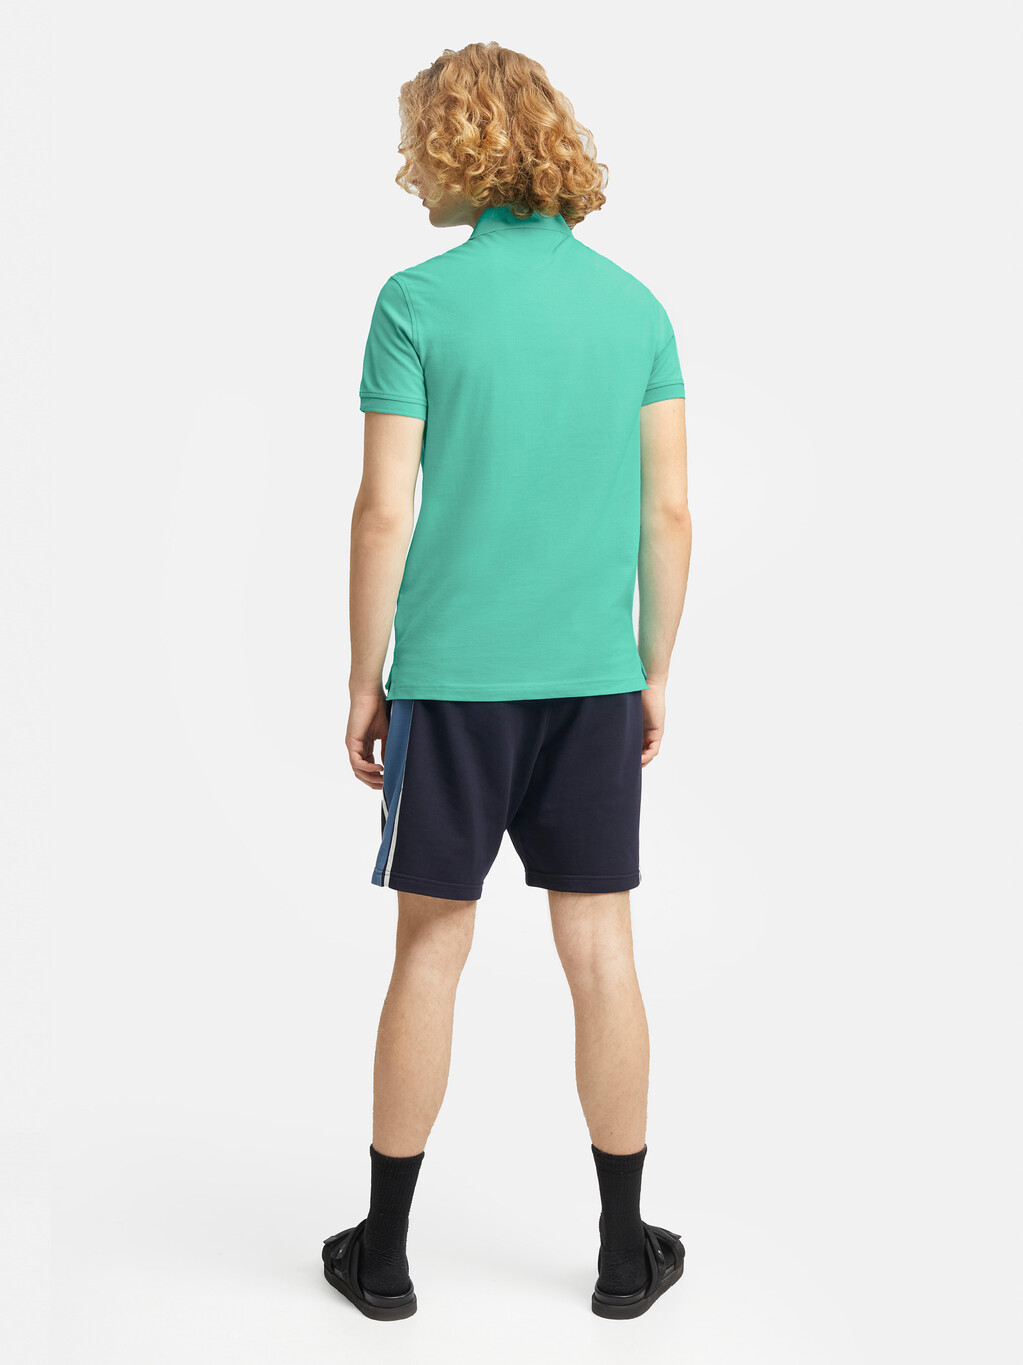 1985 Collection Slim Fit Polo, Light Jade Green, hi-res